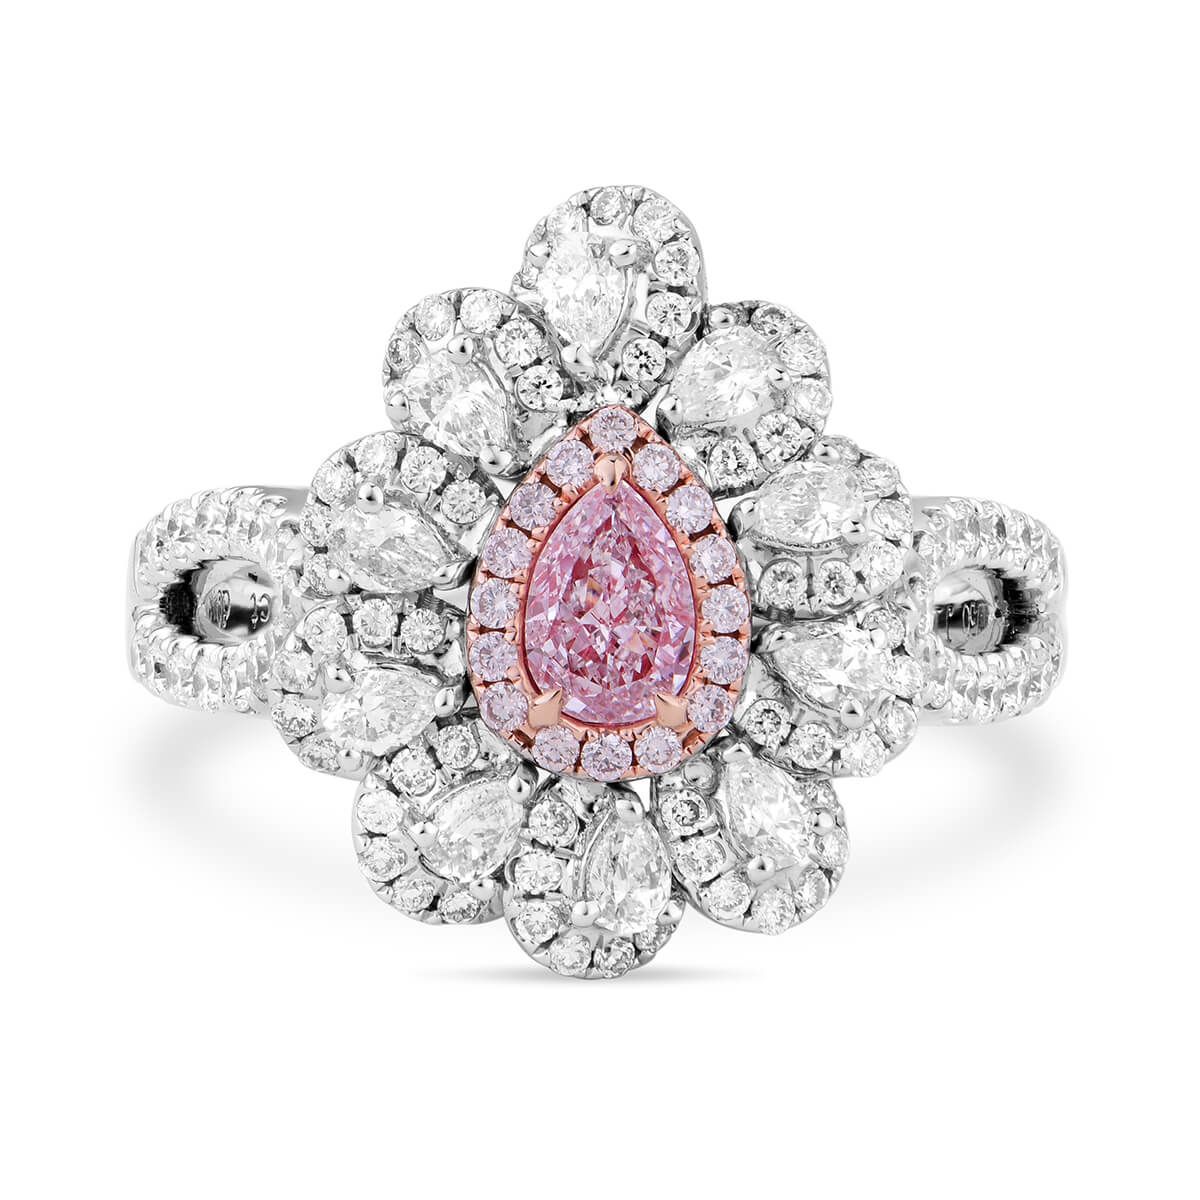 Very Light Pink Diamond Ring, 0.26 Ct. (1.16 Ct. TW), Pear shape, GIA Certified, 5192255964